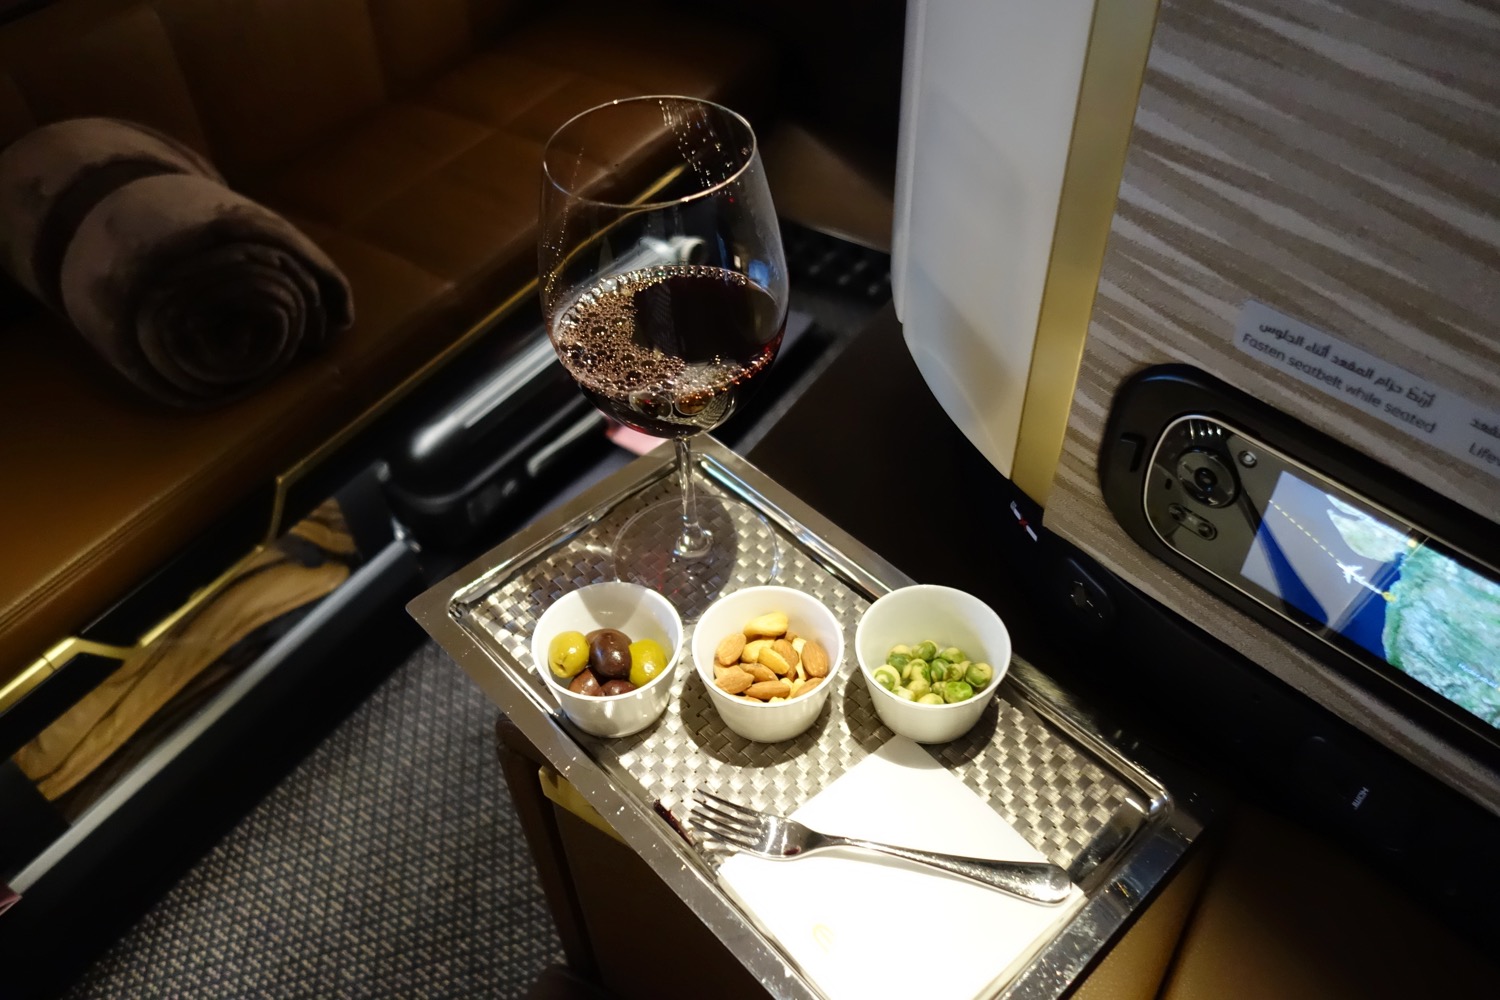 a tray with food and a glass of wine on it